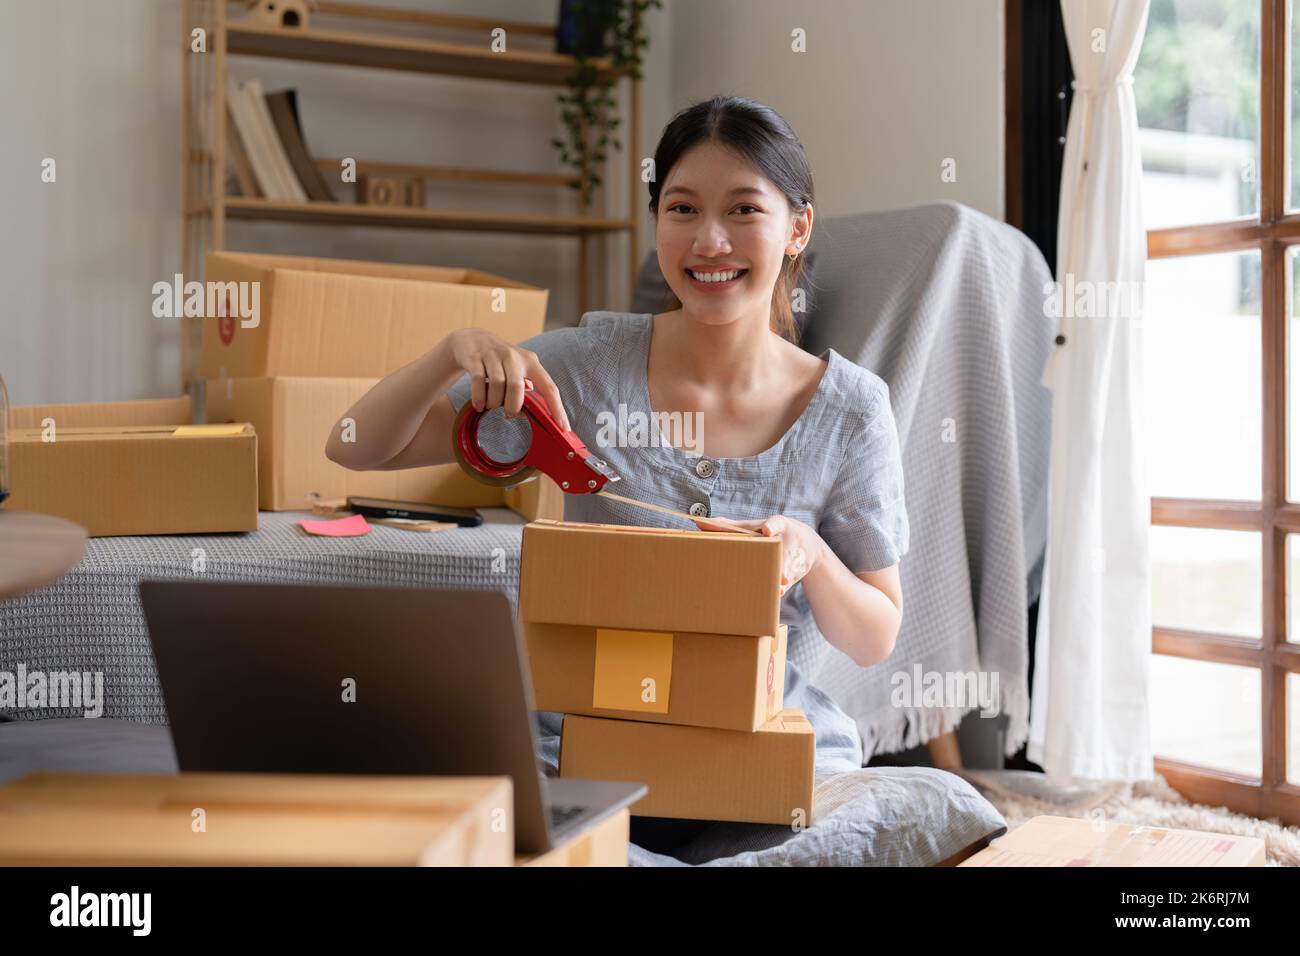 Asian small business owner working at home office. Business retail market and online sell marketing delivery, SME e-commerce concept Stock Photo